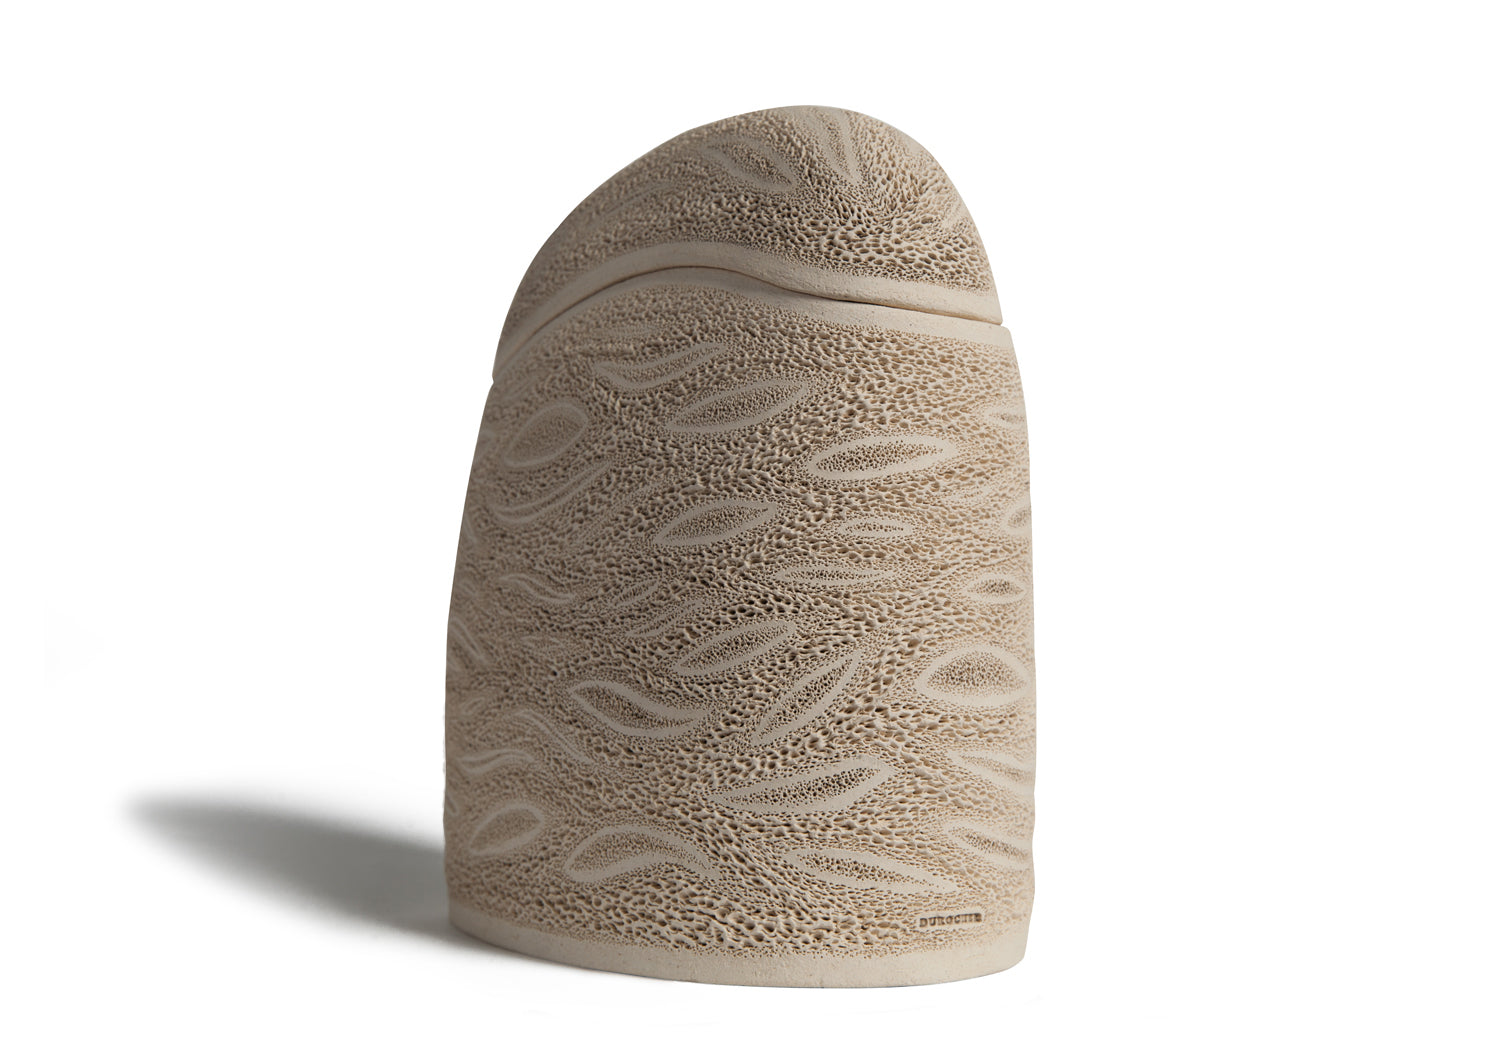 Picture of a beige ceramics (faience) monolith shaped cremation urn on sale at Muses Design Urns. Right side view.